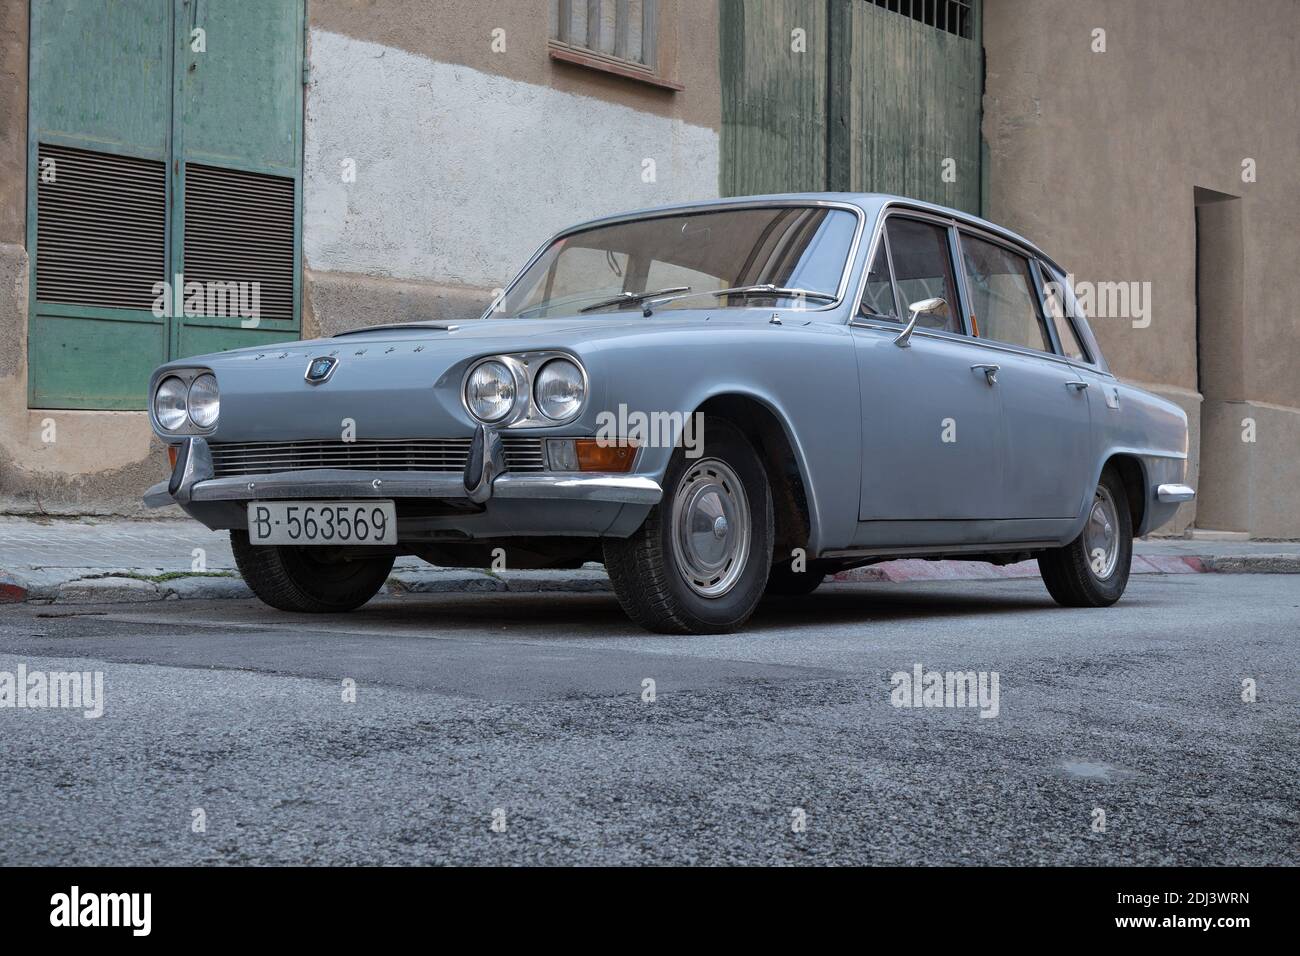 SABADELL, SPAIN-DECEMBER 12, 2020: 1963-1969 Triumph 2000 Mk 1 Saloon (Overdrive) Stock Photo